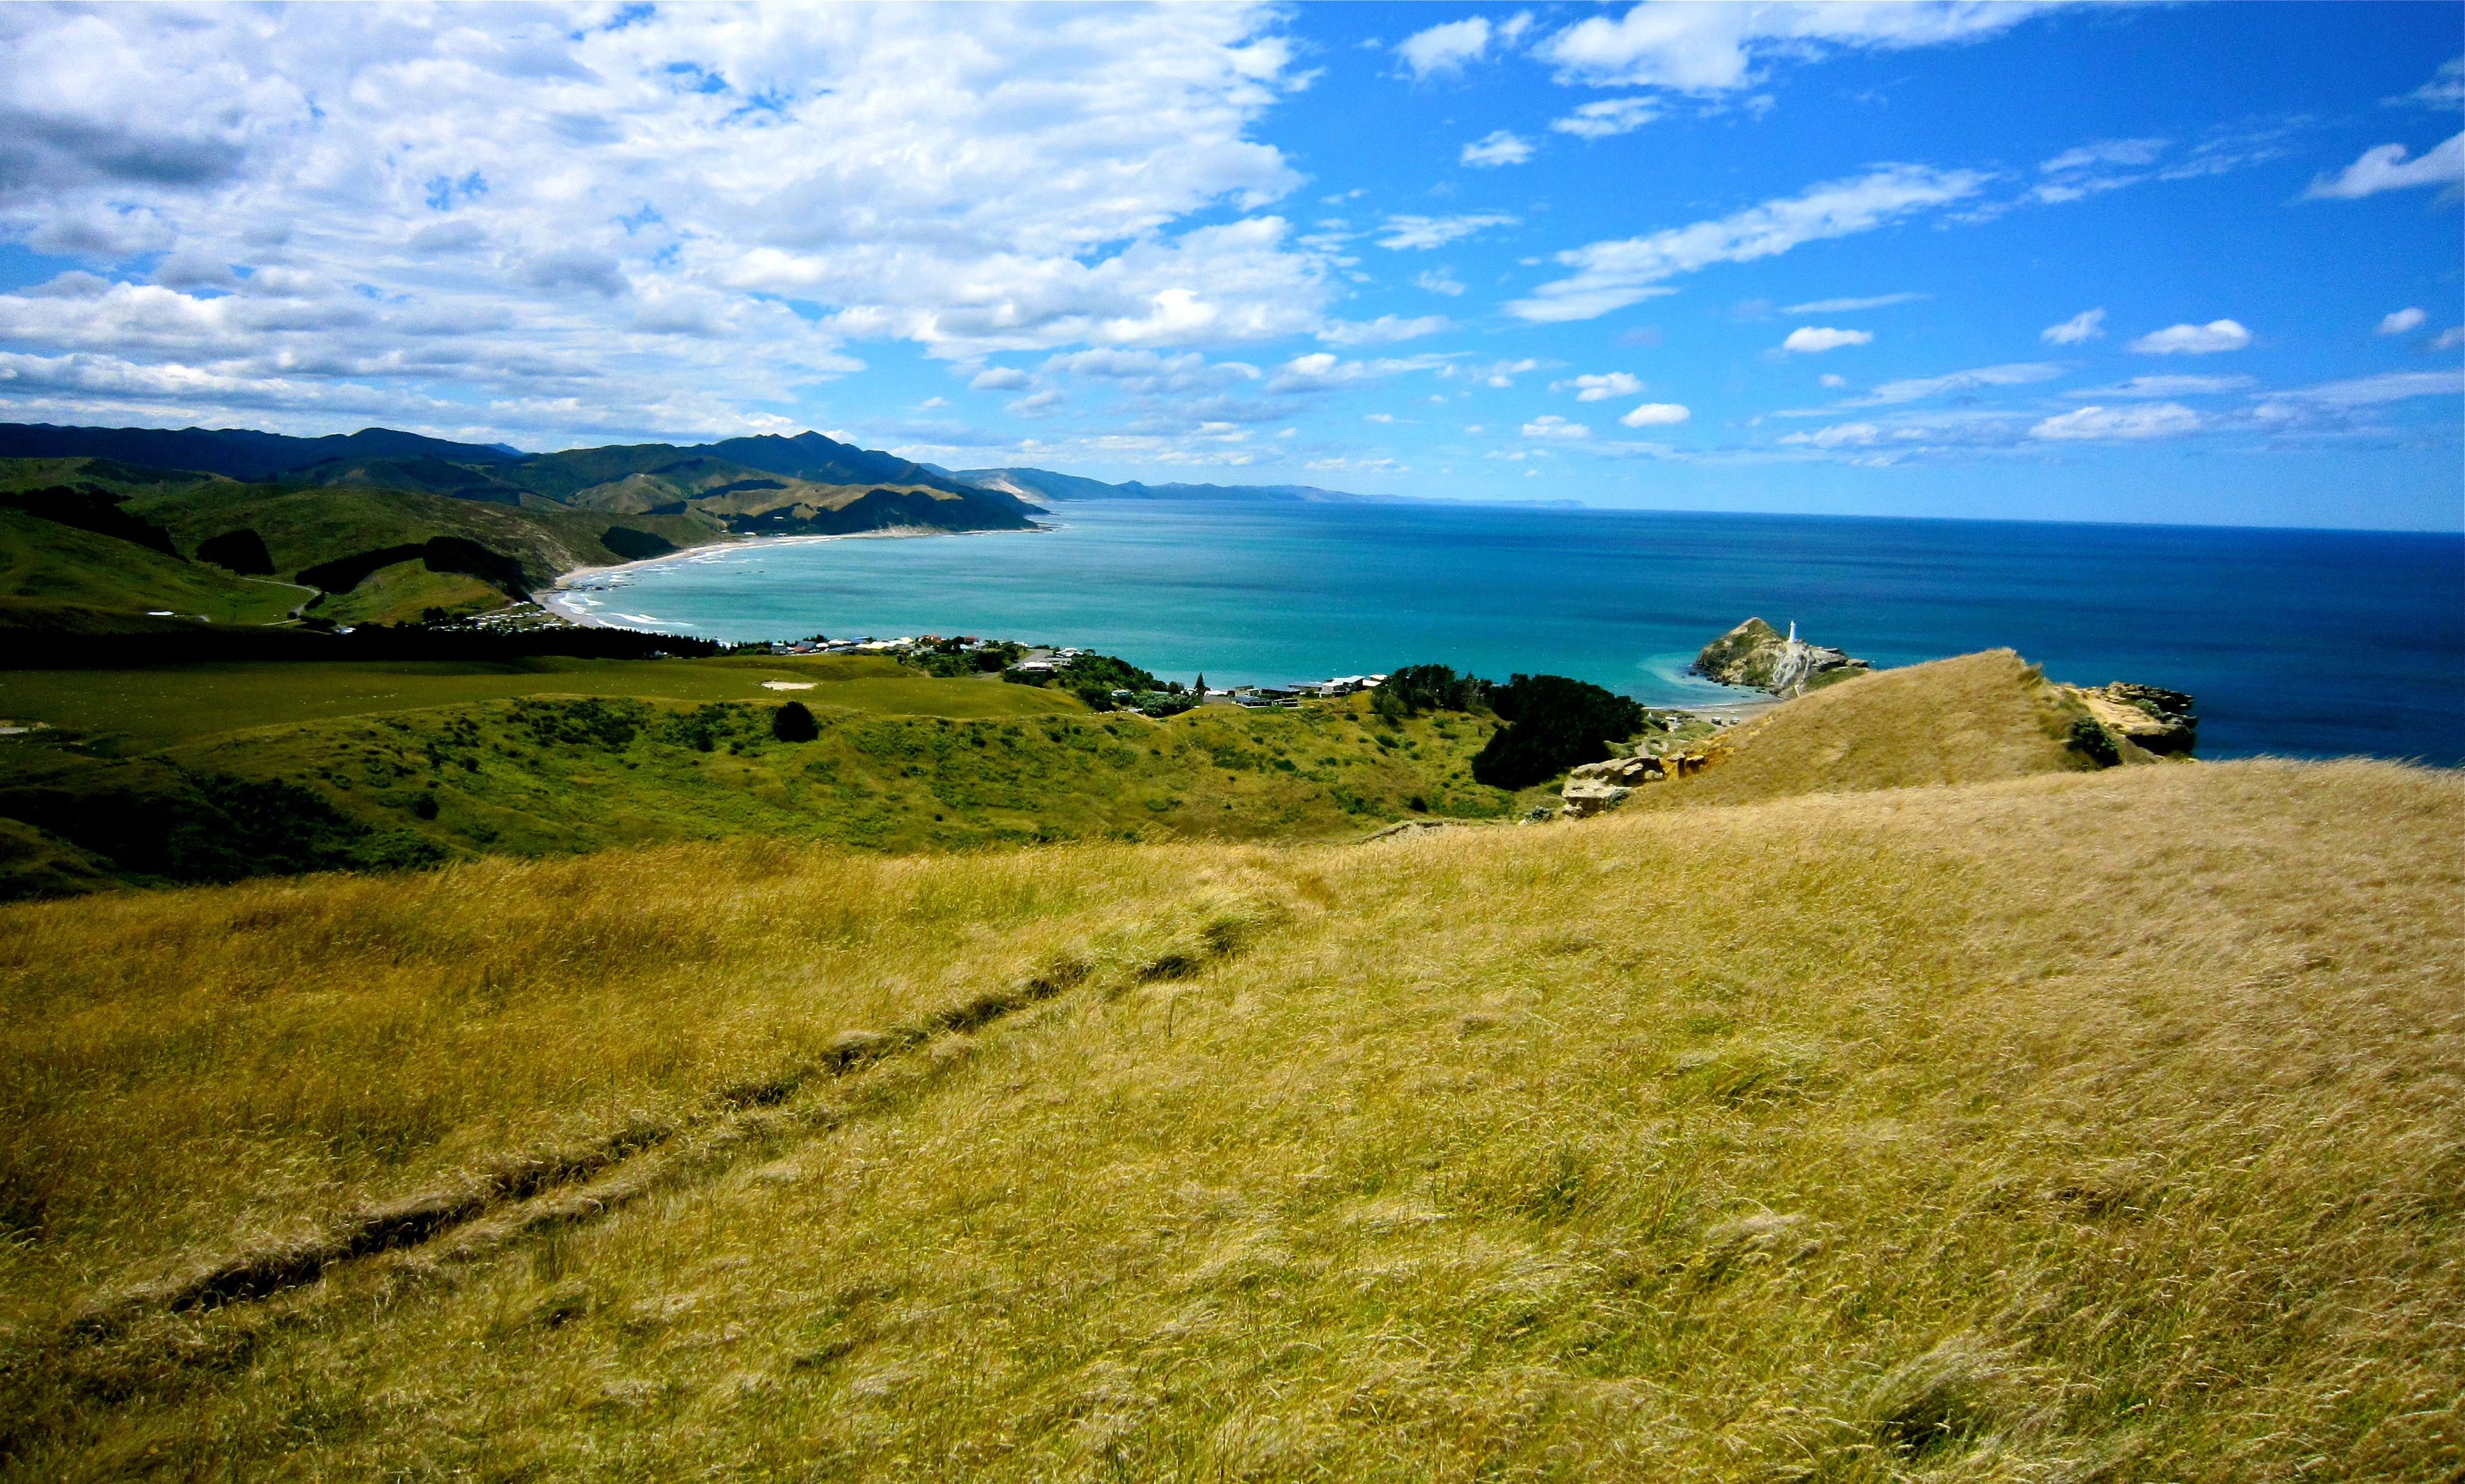 The New Zealand coastline during the daytime.